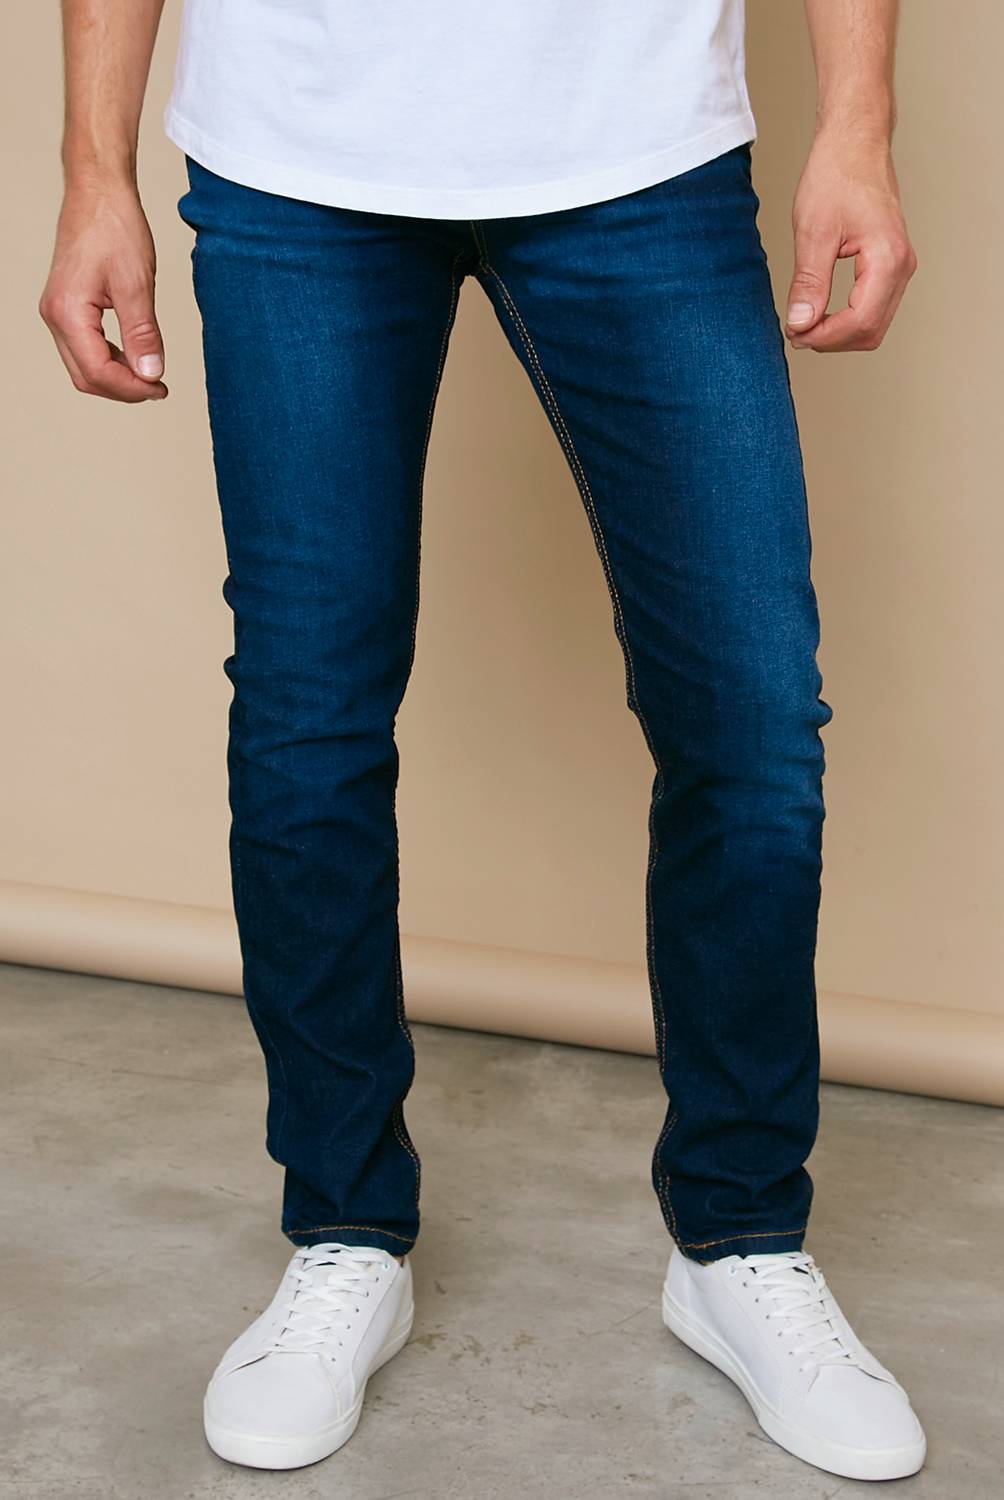 LEVIS - Jeans Skinny 510 Hombre